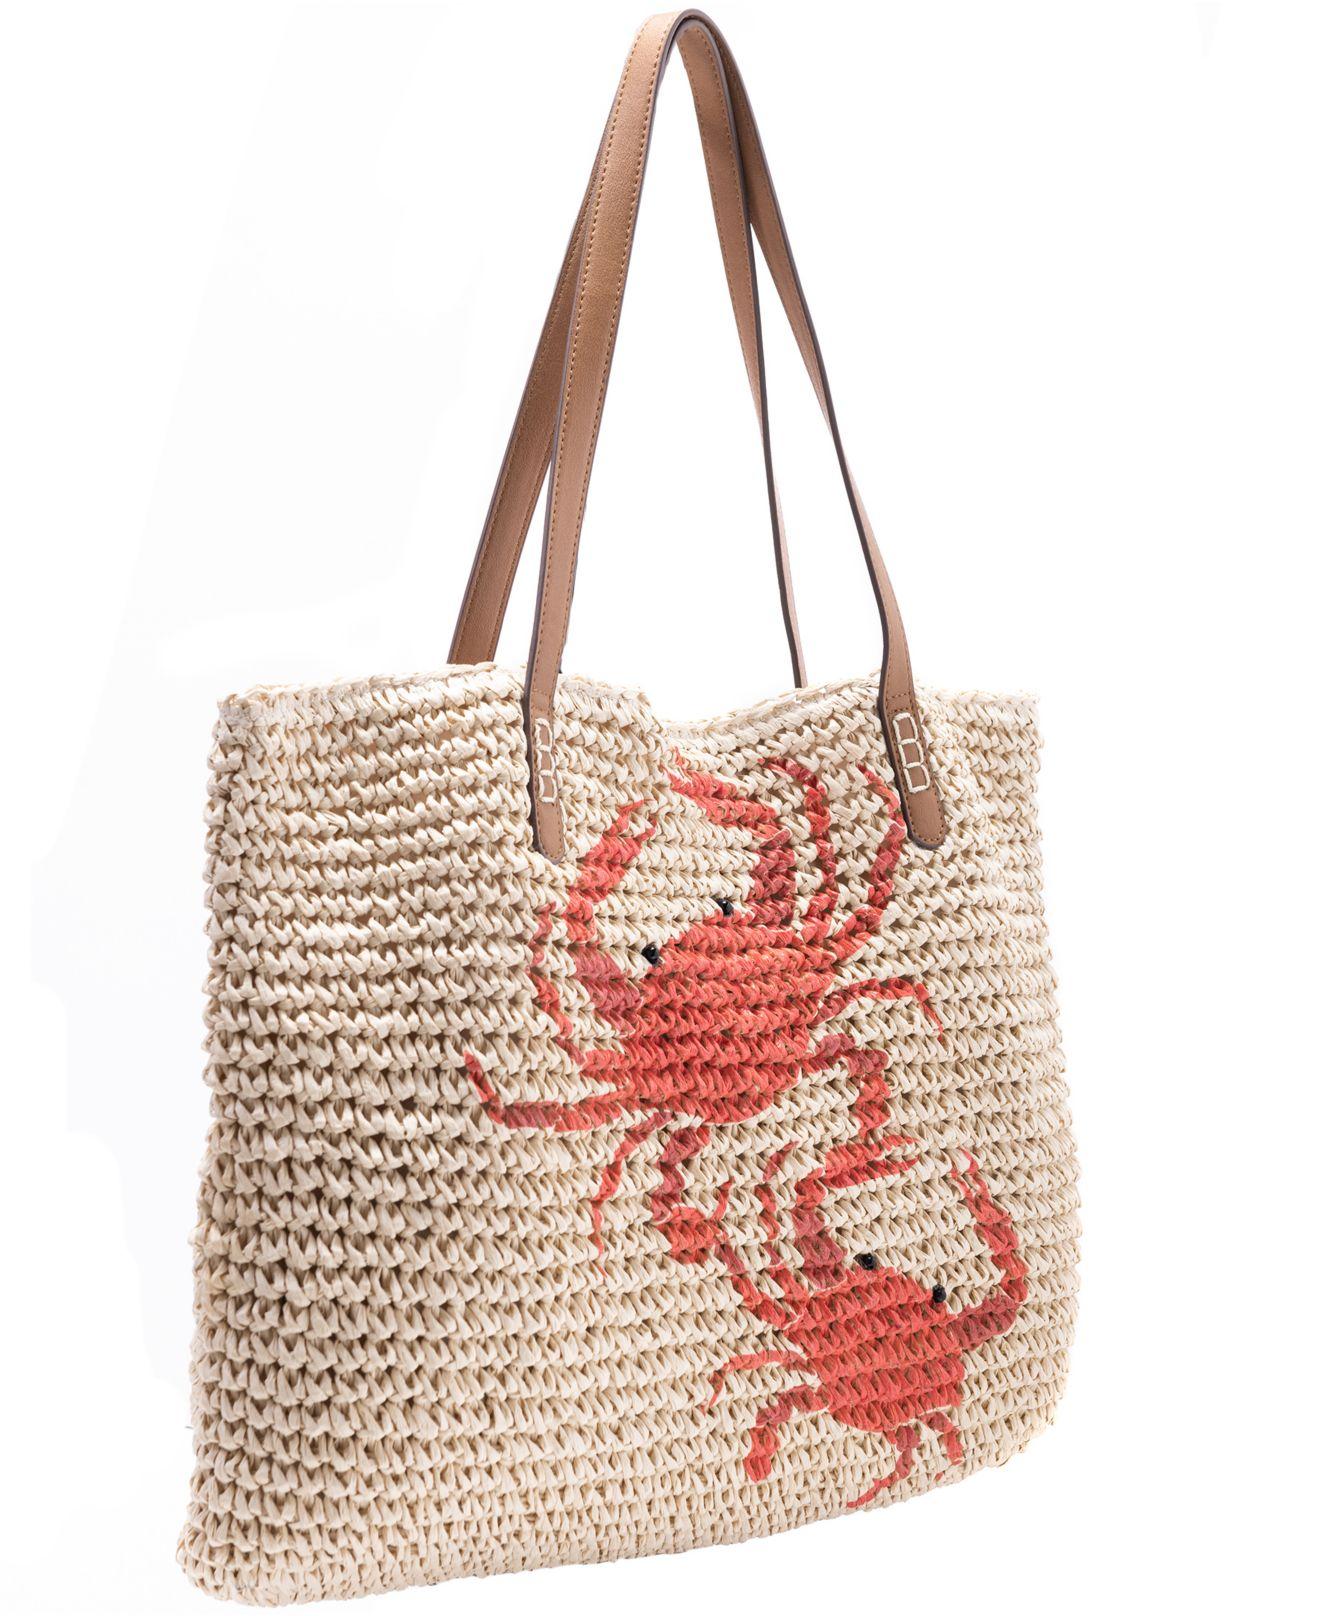 Embellish a Straw Tote with Plastic Bags - Create with Claudia